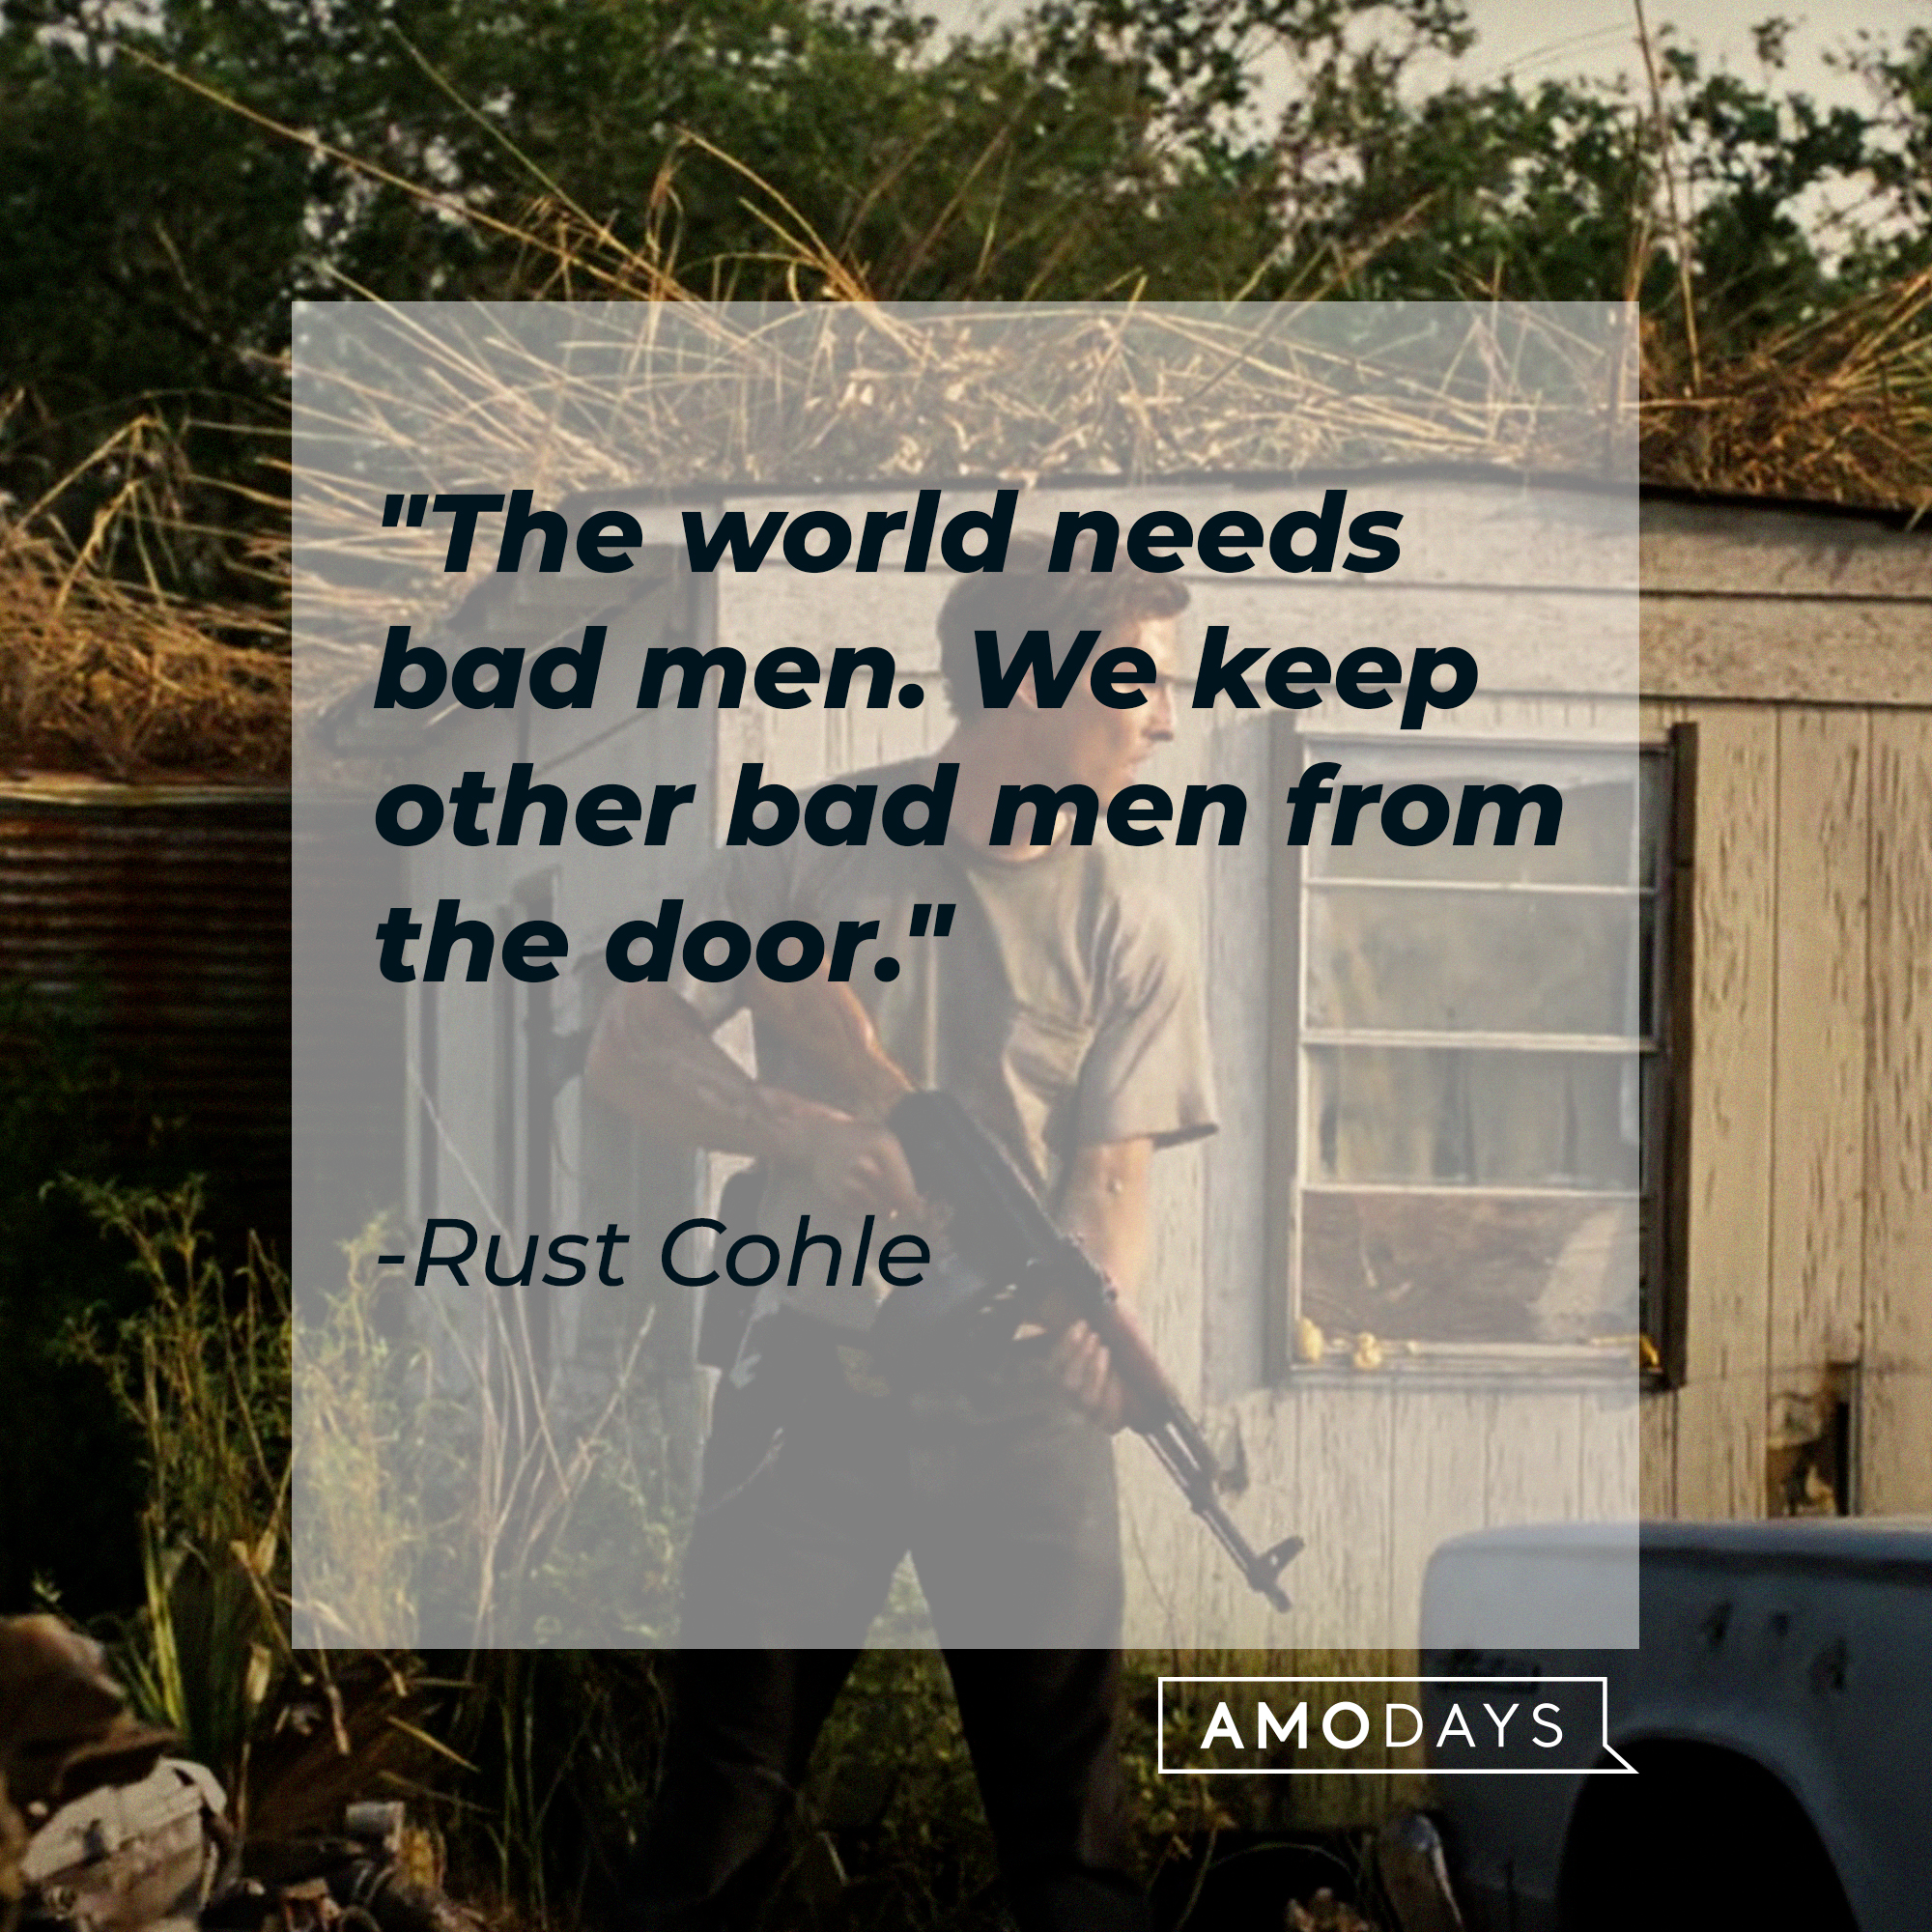 Rust Cohle's quote: "The world needs bad men. We keep other bad men from the door." | Source: facebook.com/TrueDetective